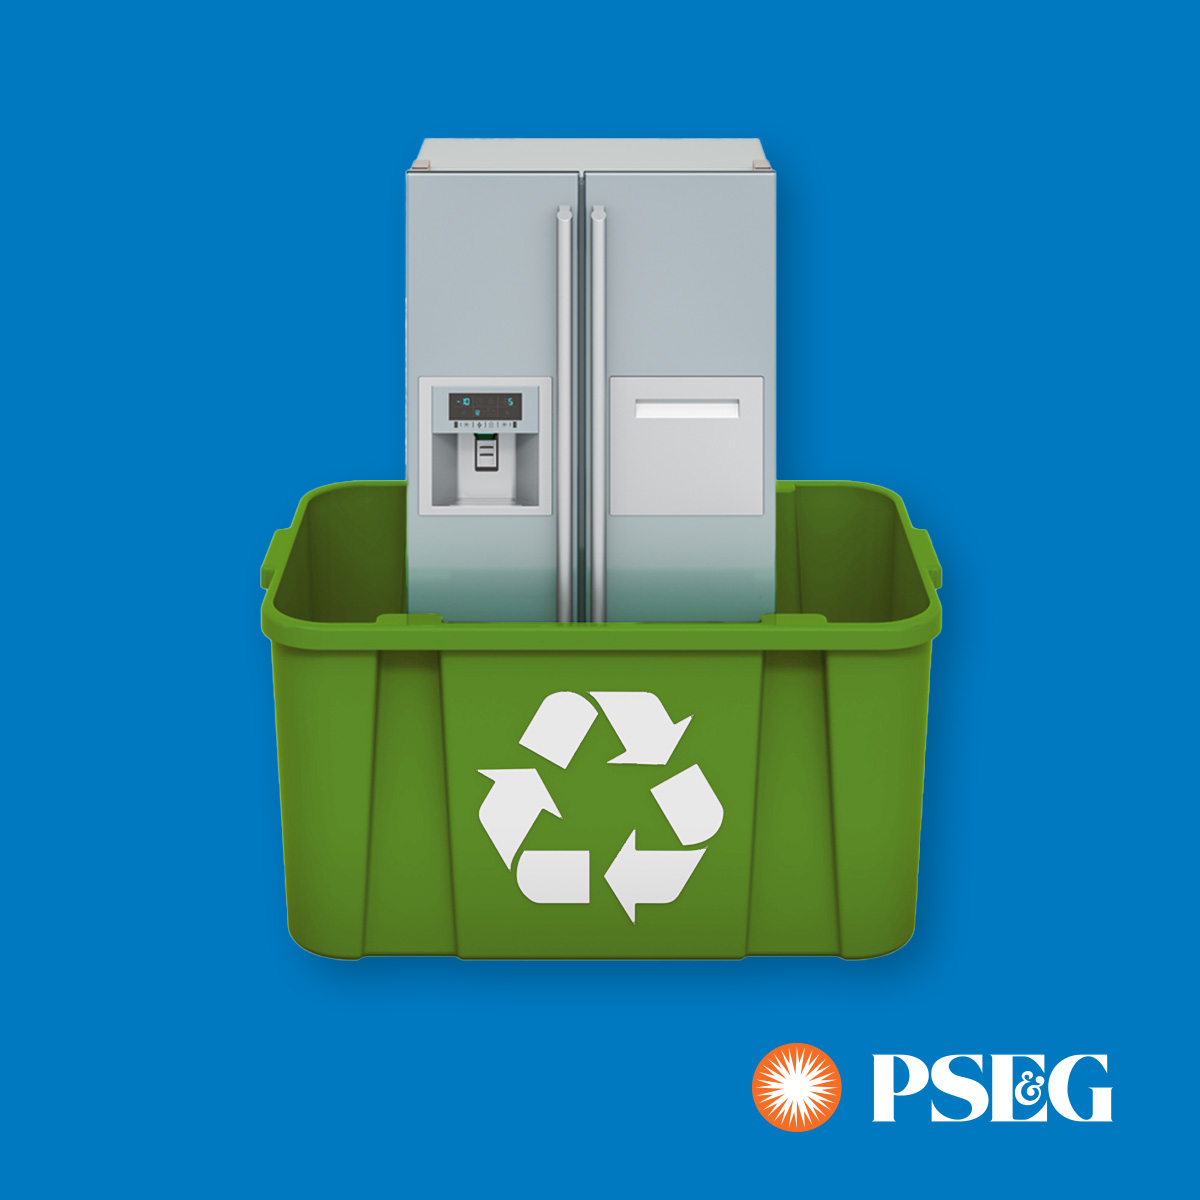 PSE&G Celebrates 6th Annual Global Recycling Day